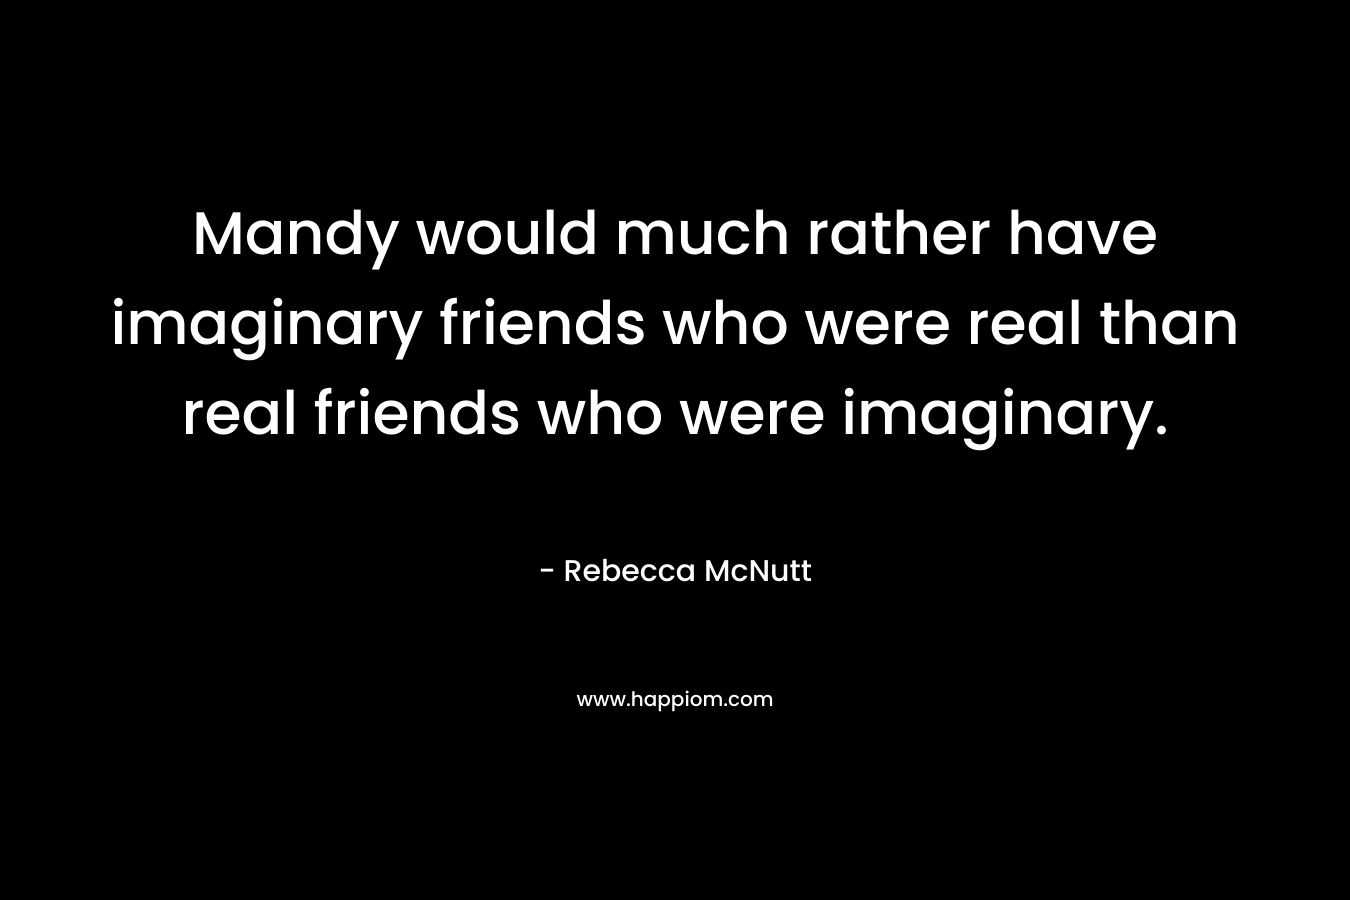 Mandy would much rather have imaginary friends who were real than real friends who were imaginary.